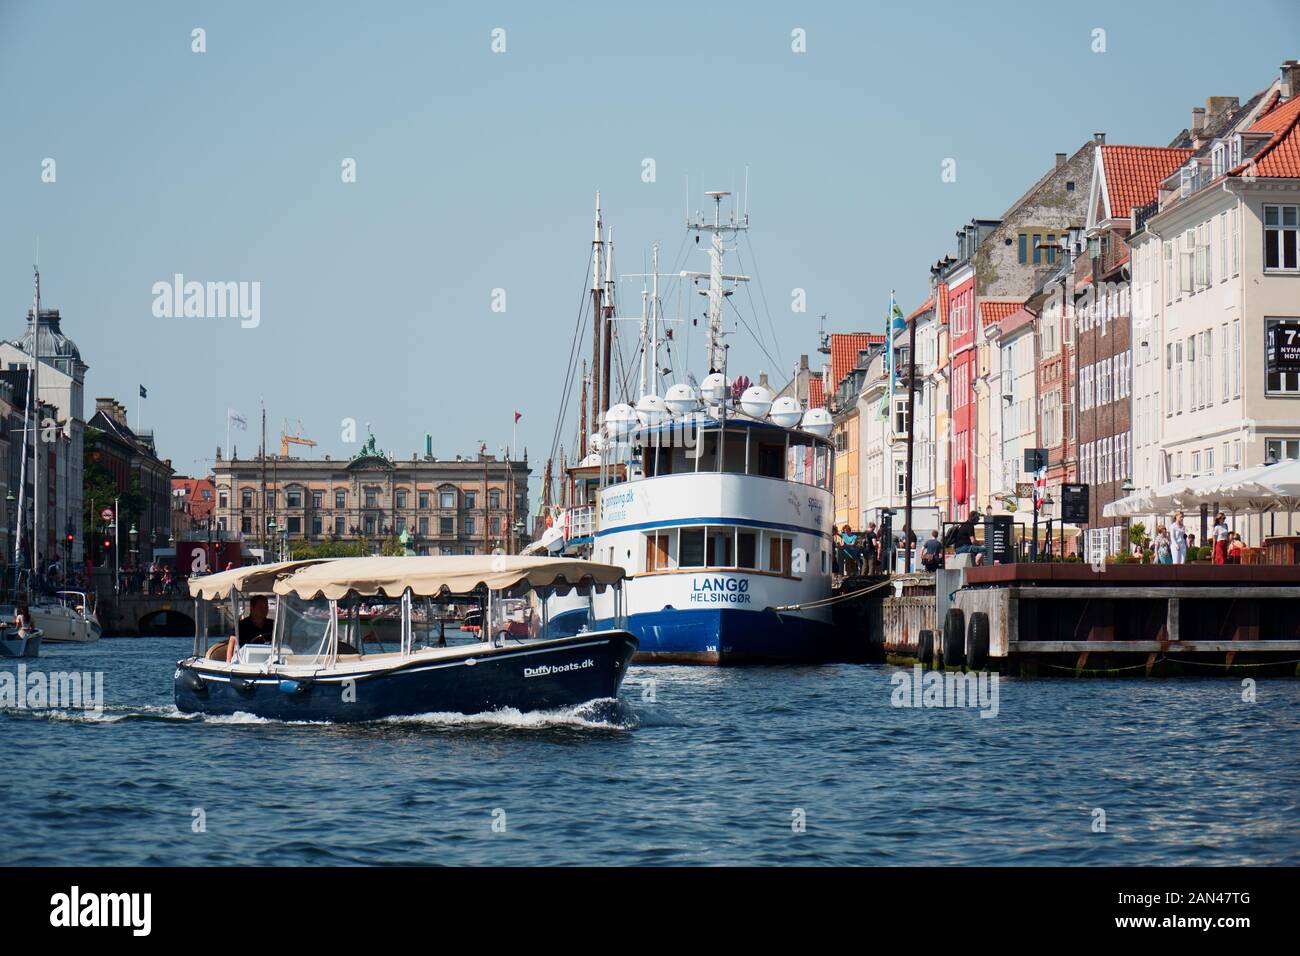 Boats in canal in central Copenhagen Stock Photo